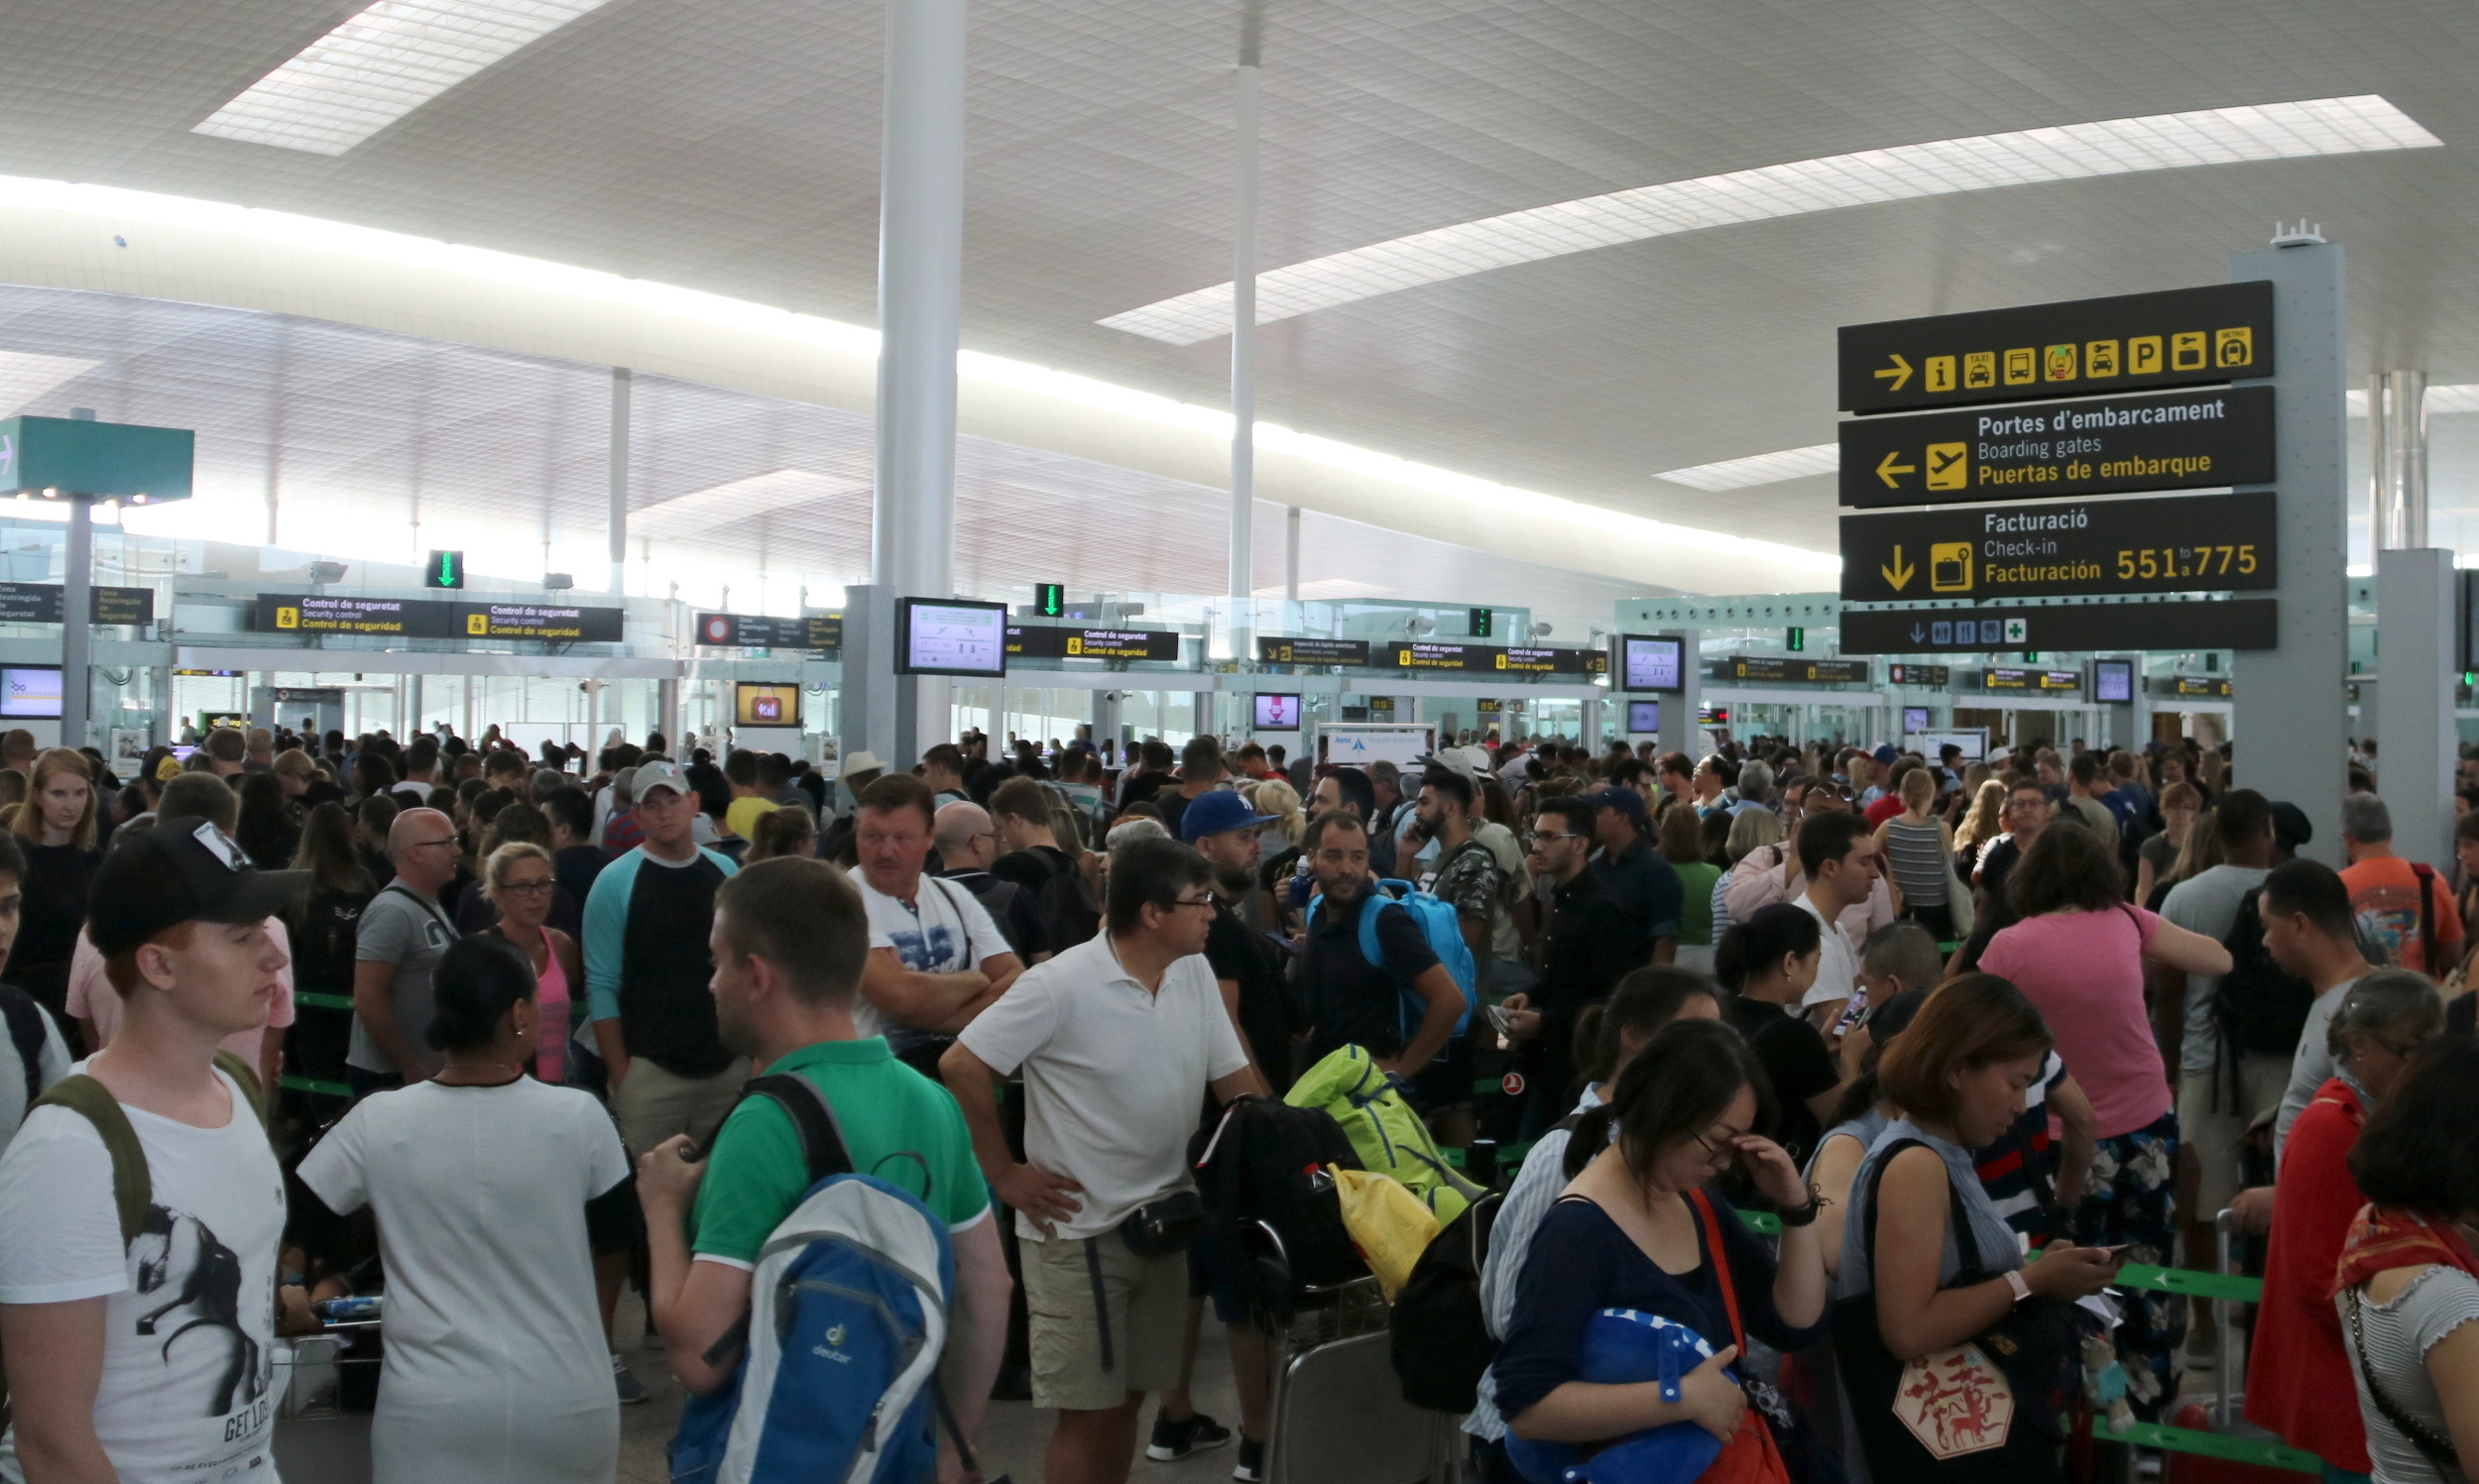 Long queues at Barcelona airport security checkpoint